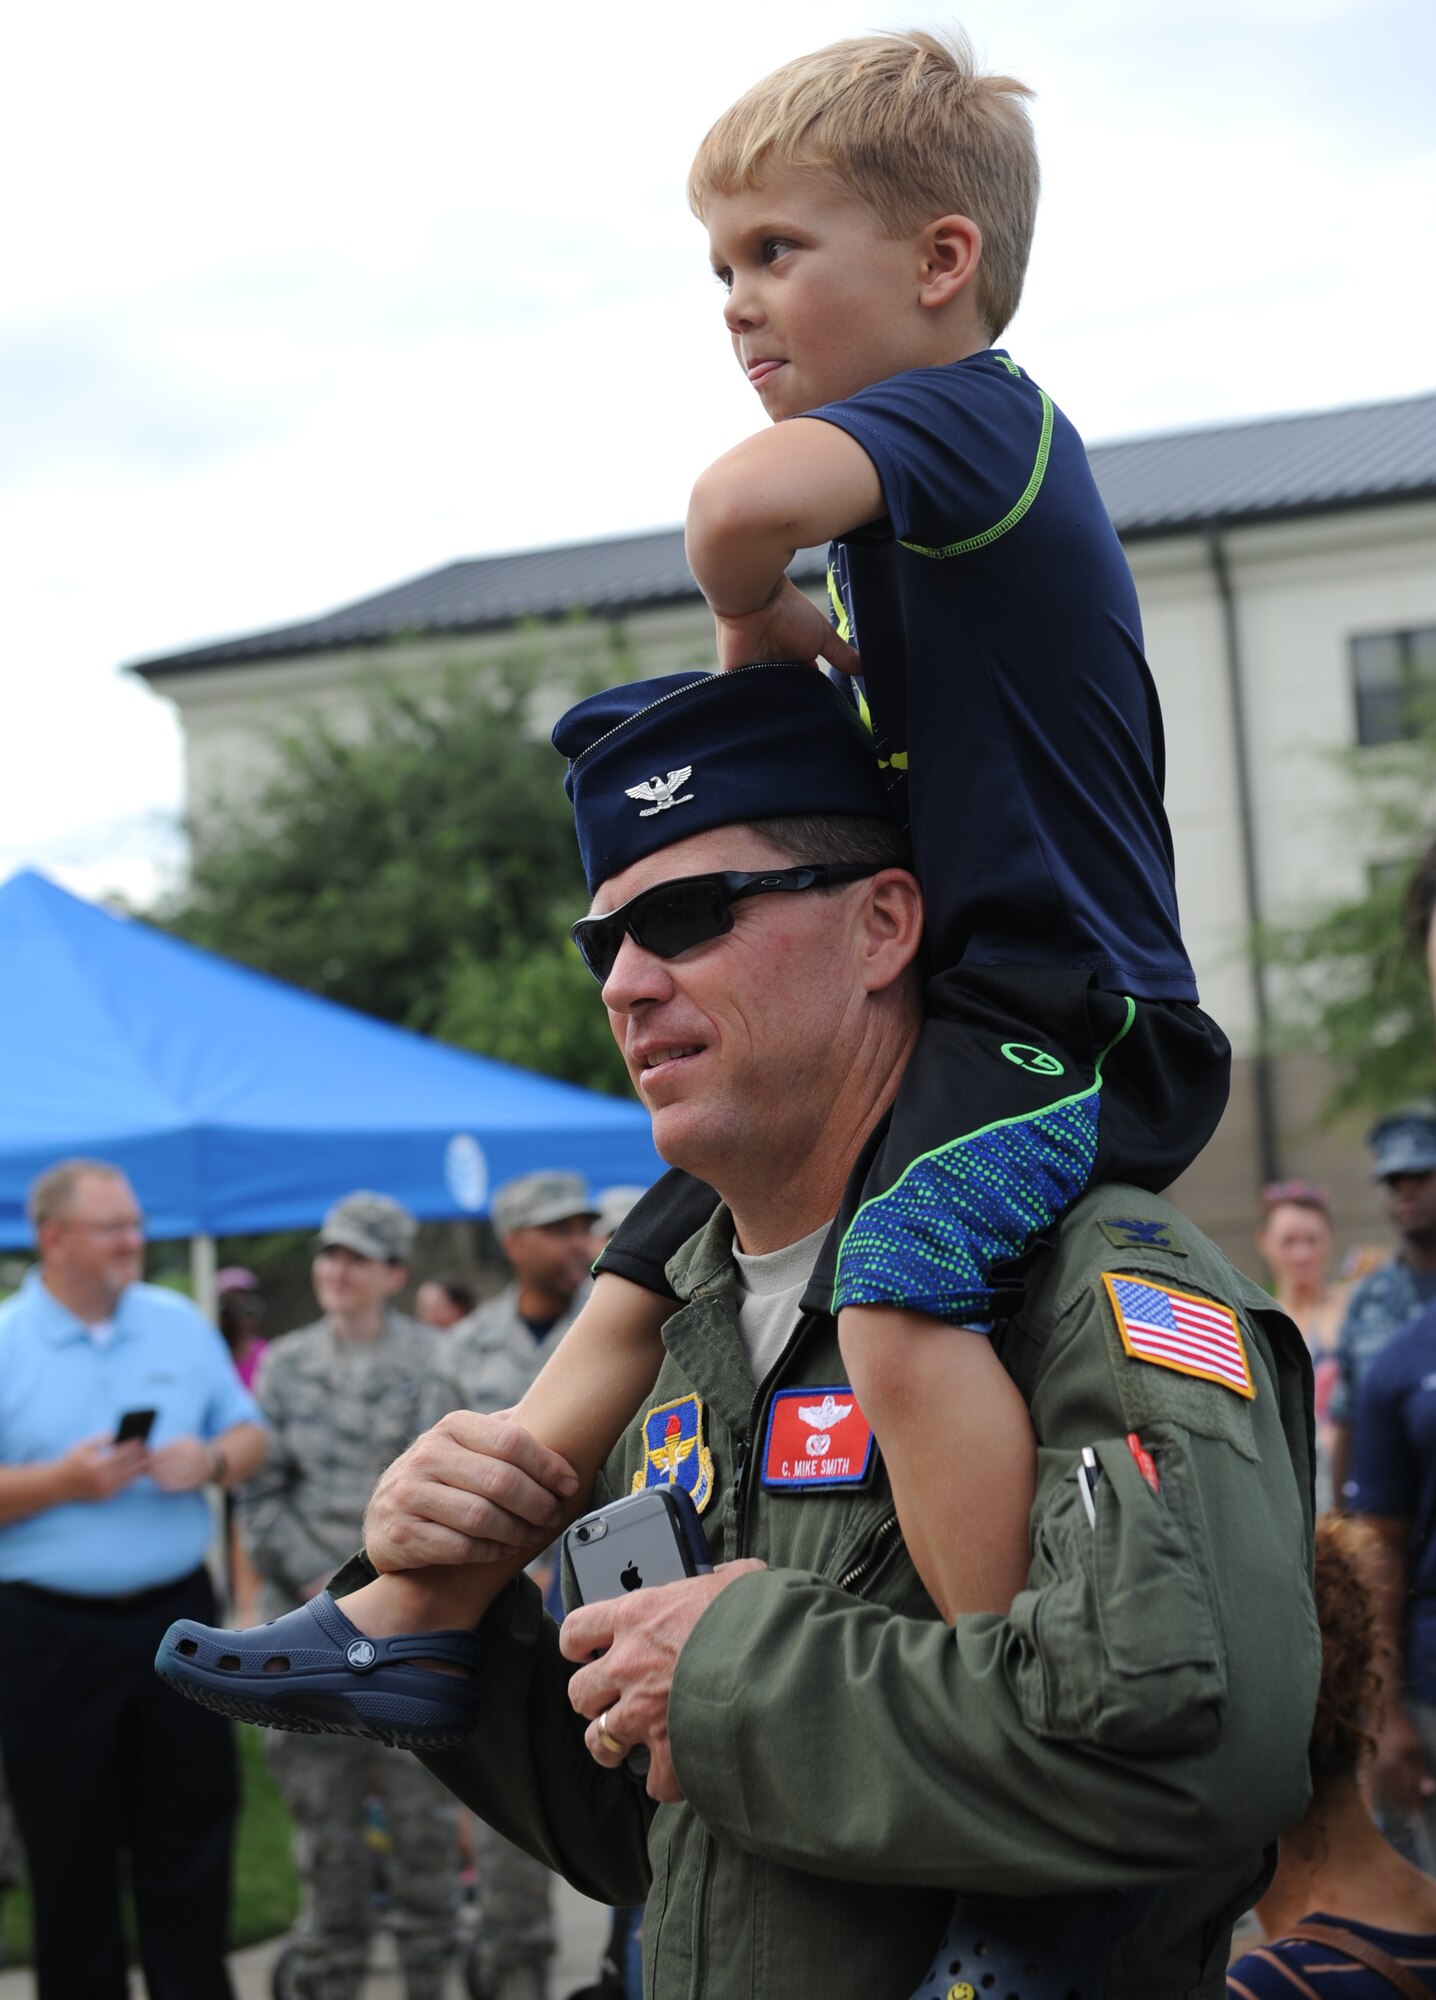 Col. C. Mike Smith, 81st Training Wing vice commander, and his son, Cam, watch the cake-cutting ceremony during Keesler’s Air Force birthday celebration in front of Vandenberg Hall Sept. 16, 2016, on Keesler Air Force Base, Miss. The event also included music and food to celebrate the Air Force’s 69th birthday. (U.S. Air Force photo by Kemberly Groue/Released)